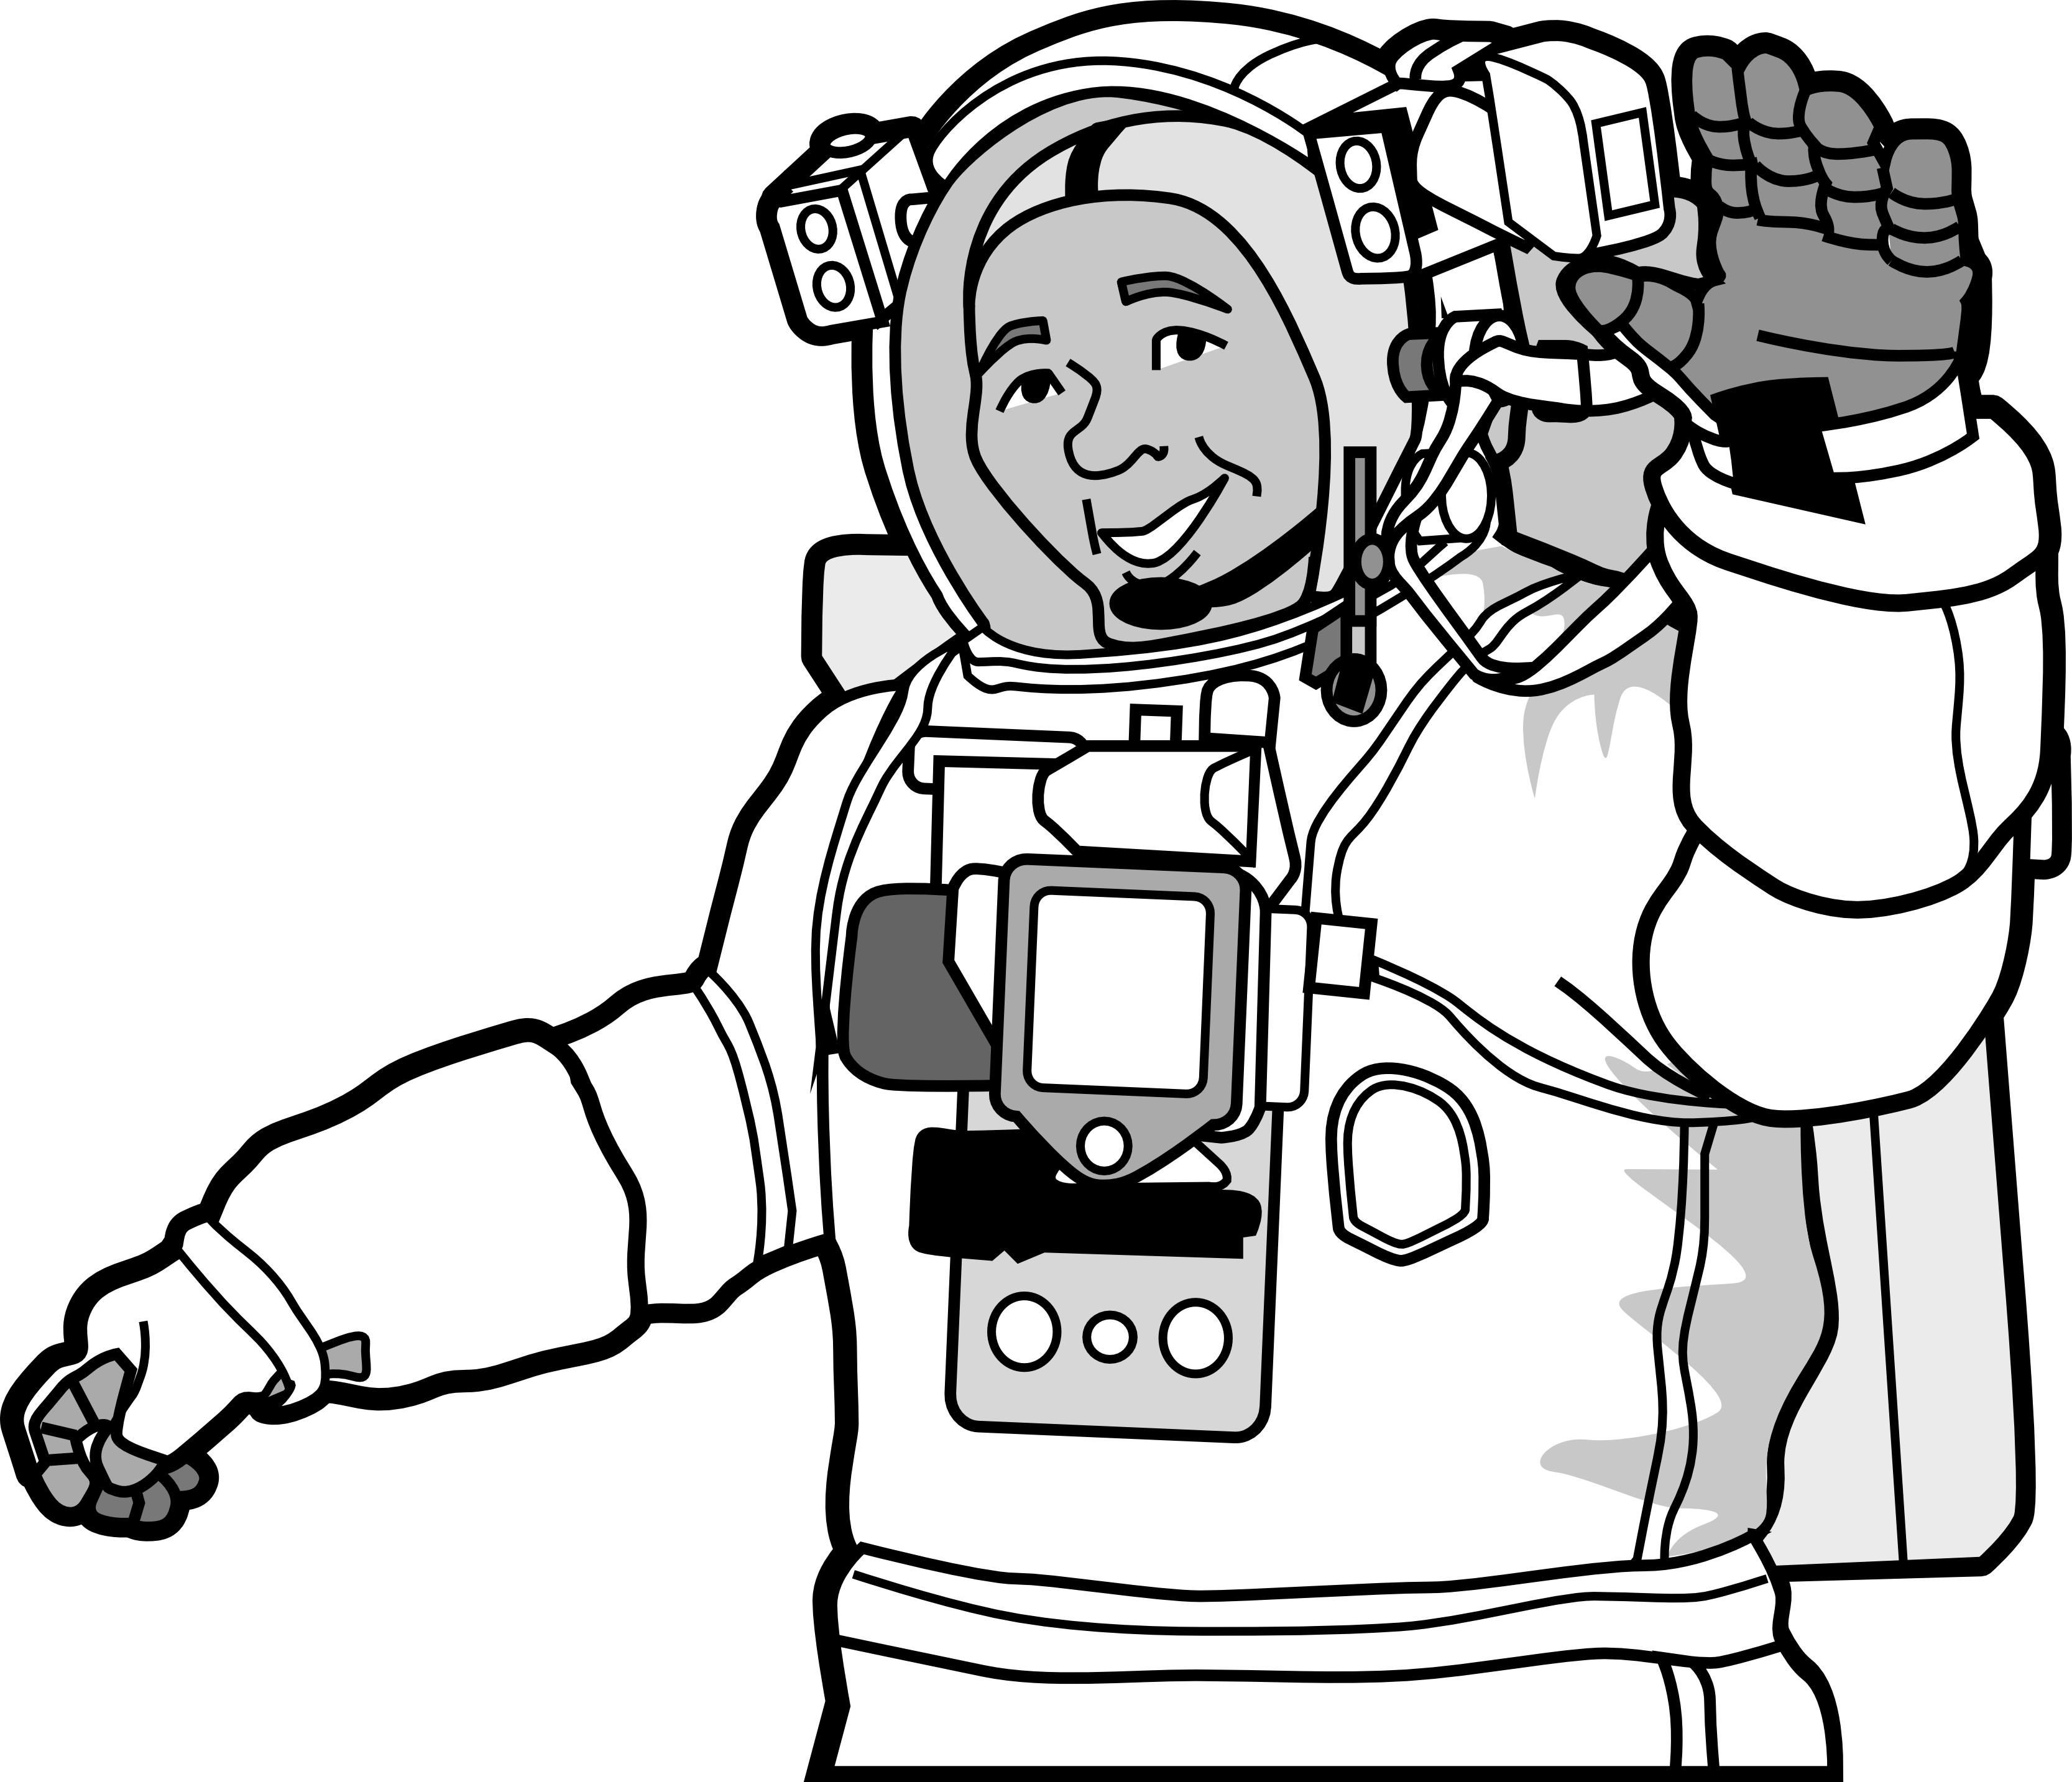 Free Astronaut Pictures For Kids, Download Free Astronaut Pictures For